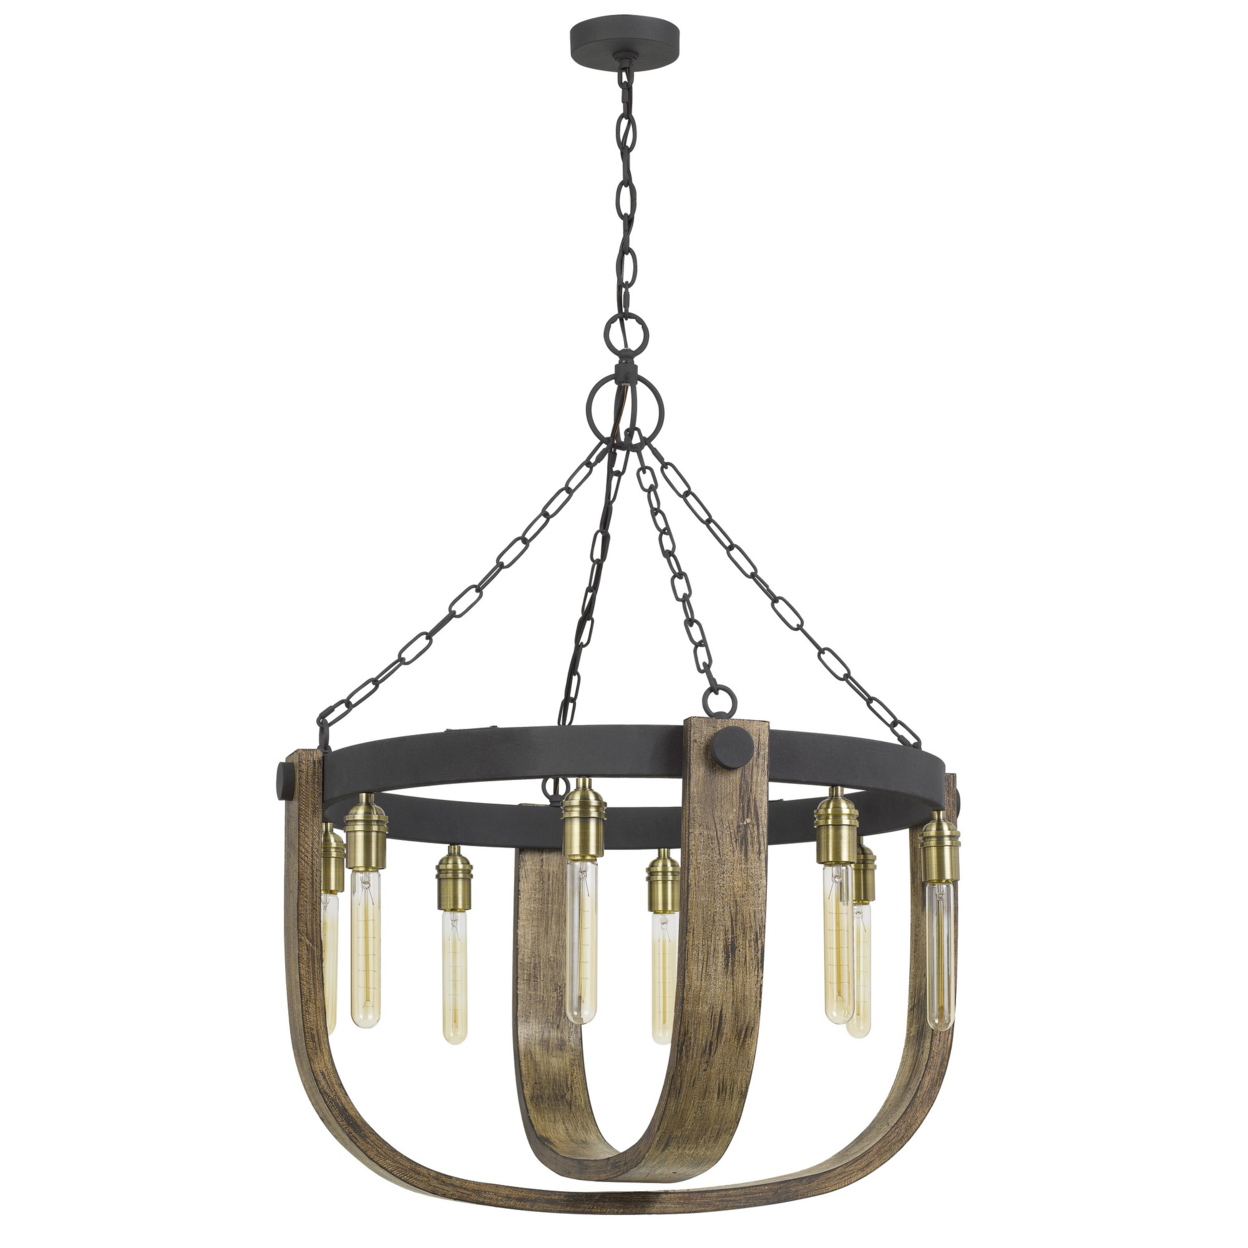 Intersected Double U Shaped Wooden Chandelier With Metal Frame, Brown- Saltoro Sherpi